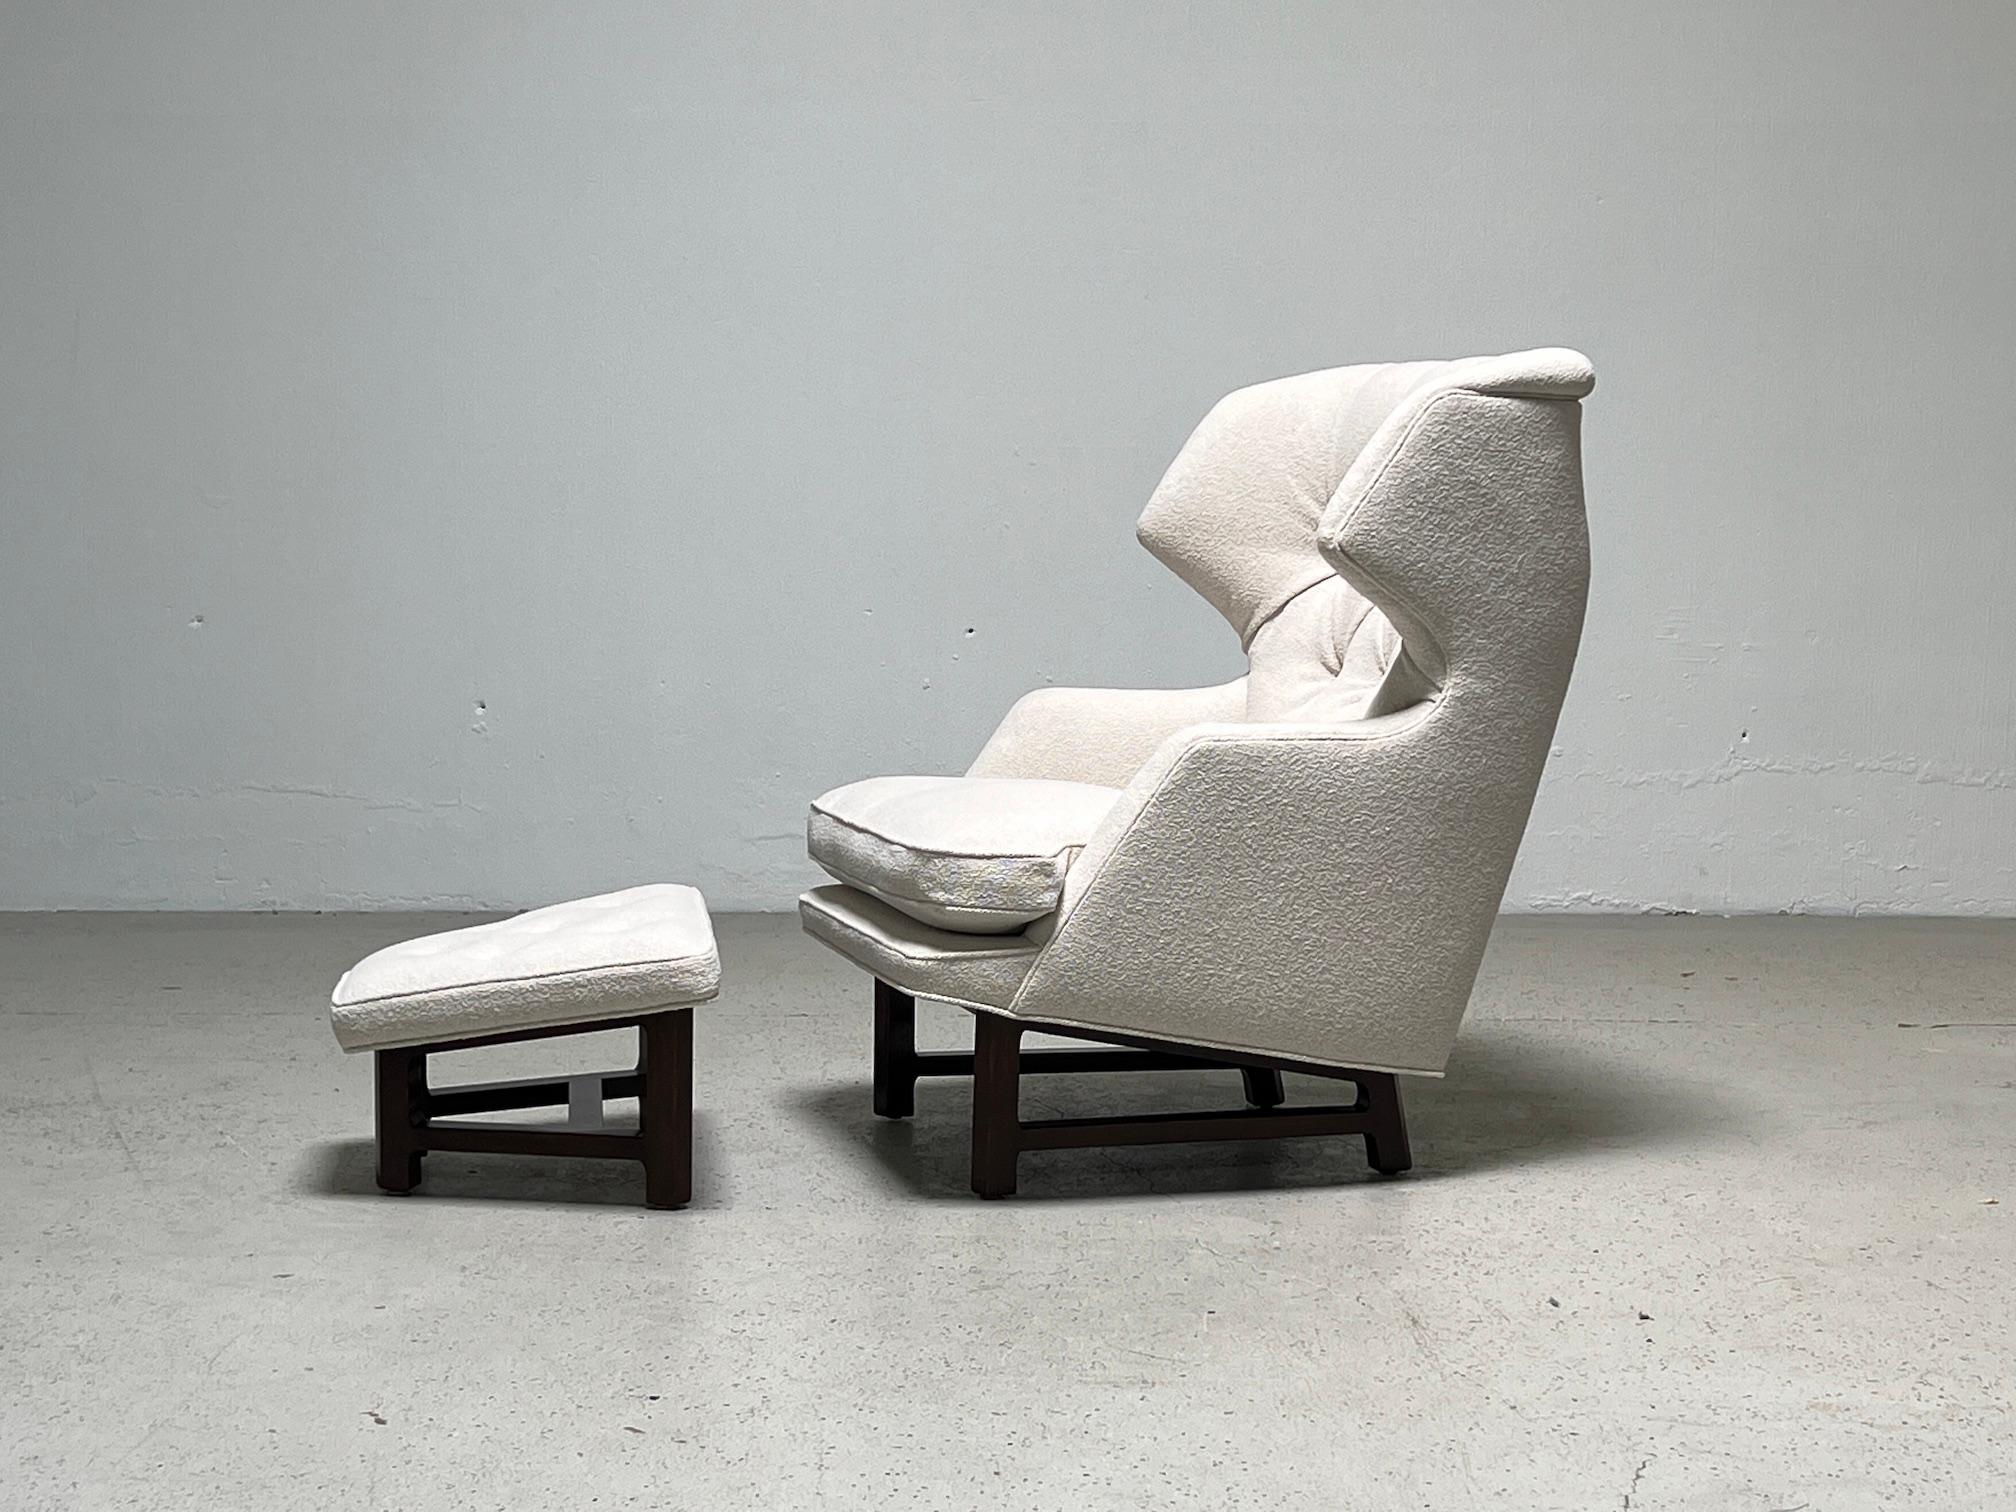 Mahogany Janus Wing Chair and Ottoman by Edward Wormley for Dunbar